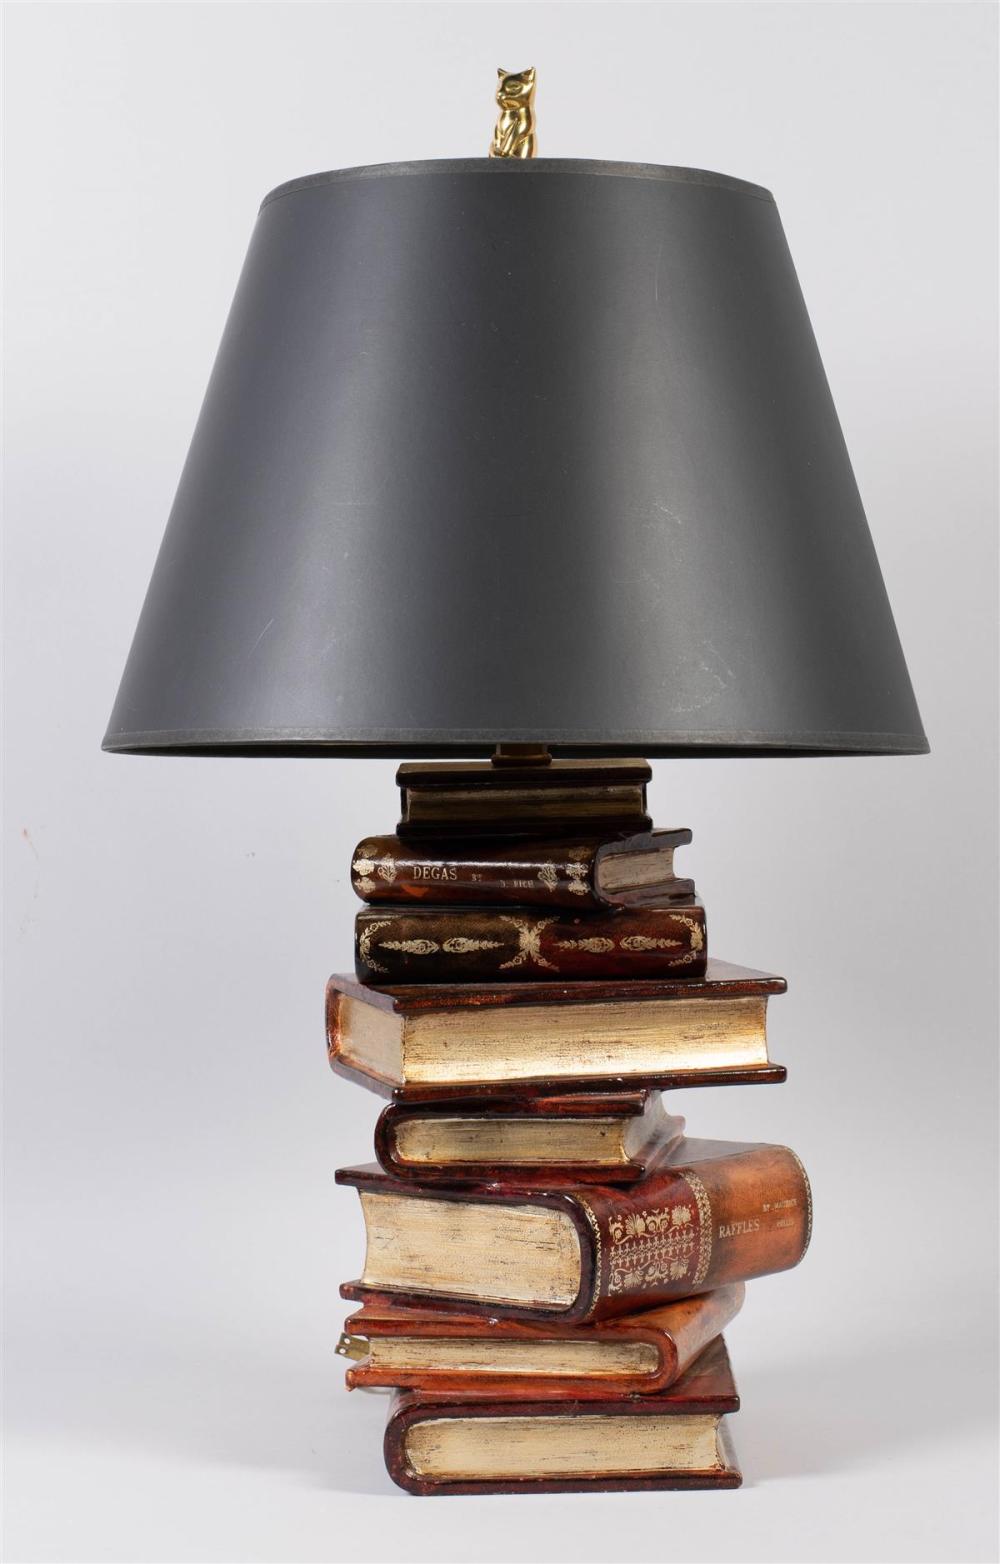 TABLE LAMP IN THE FORM OF A STACK 33c854